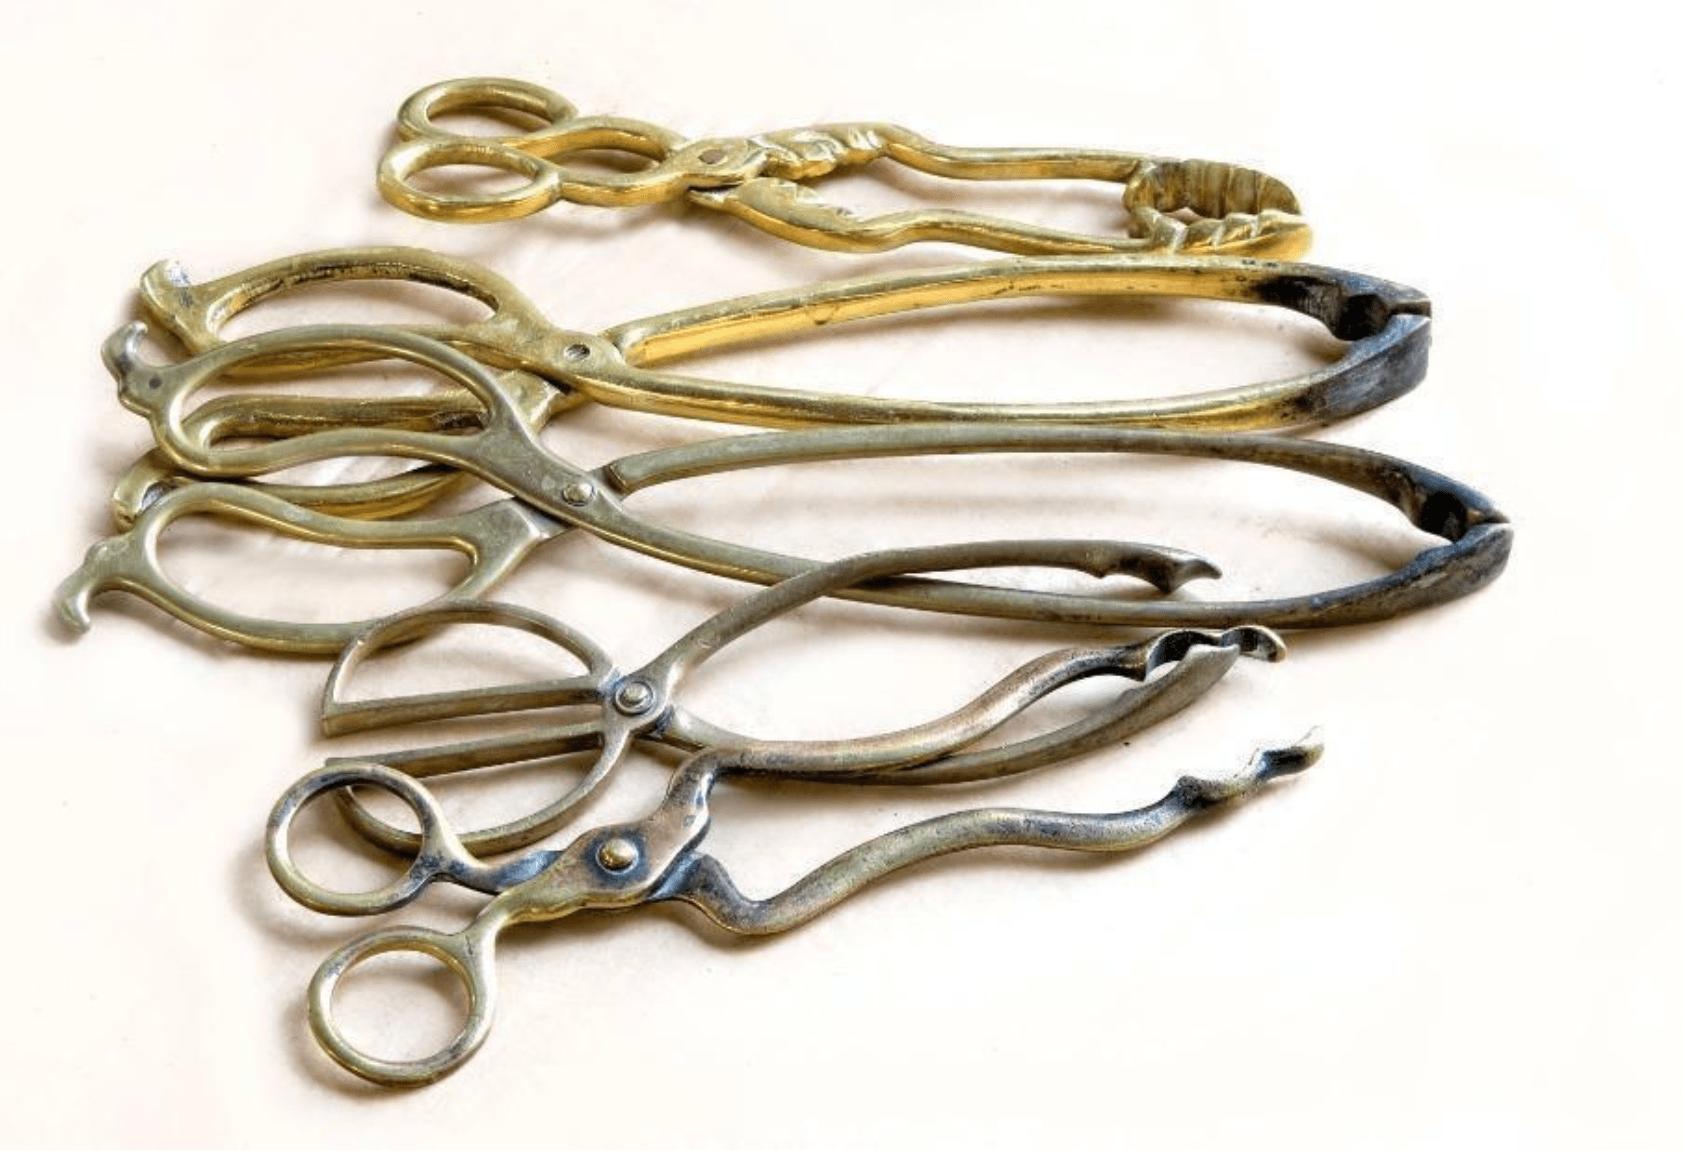 See our selection of antique coal scissors or coal tongs here.